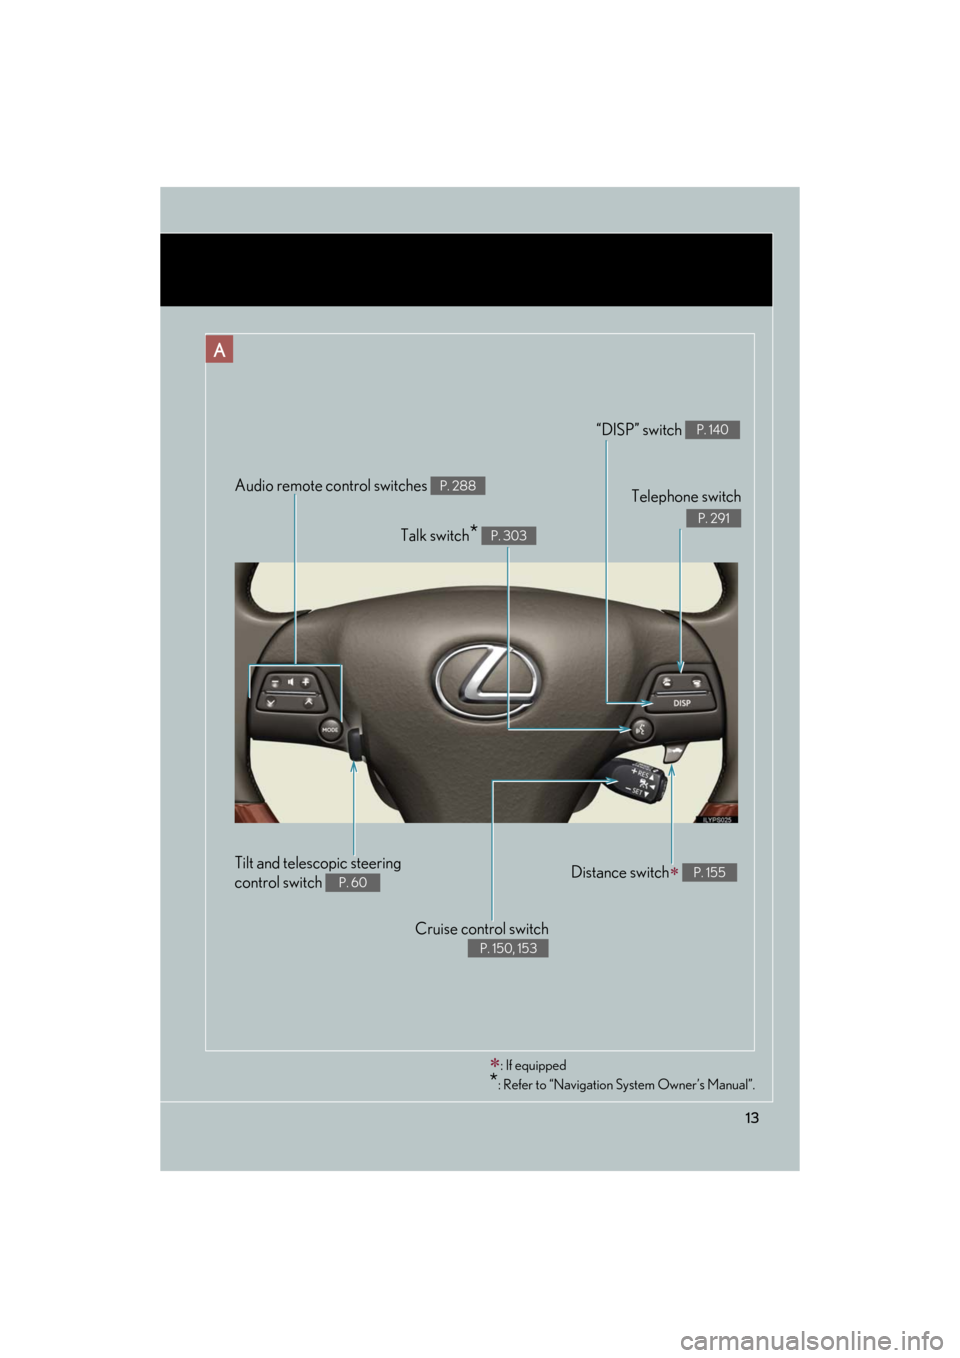 Lexus GS350 2008  Specifications / LEXUS 2008 GS460/350  (OM30A87U) User Guide 13
GS_G_U
May 13, 2008 5:14 pm
Audio remote control switches P. 288
Cruise control switch 
 
P. 150, 153
Telephone switch 
P. 291
“DISP” switch P. 140
Distance switch P. 155
Talk switch* P. 303